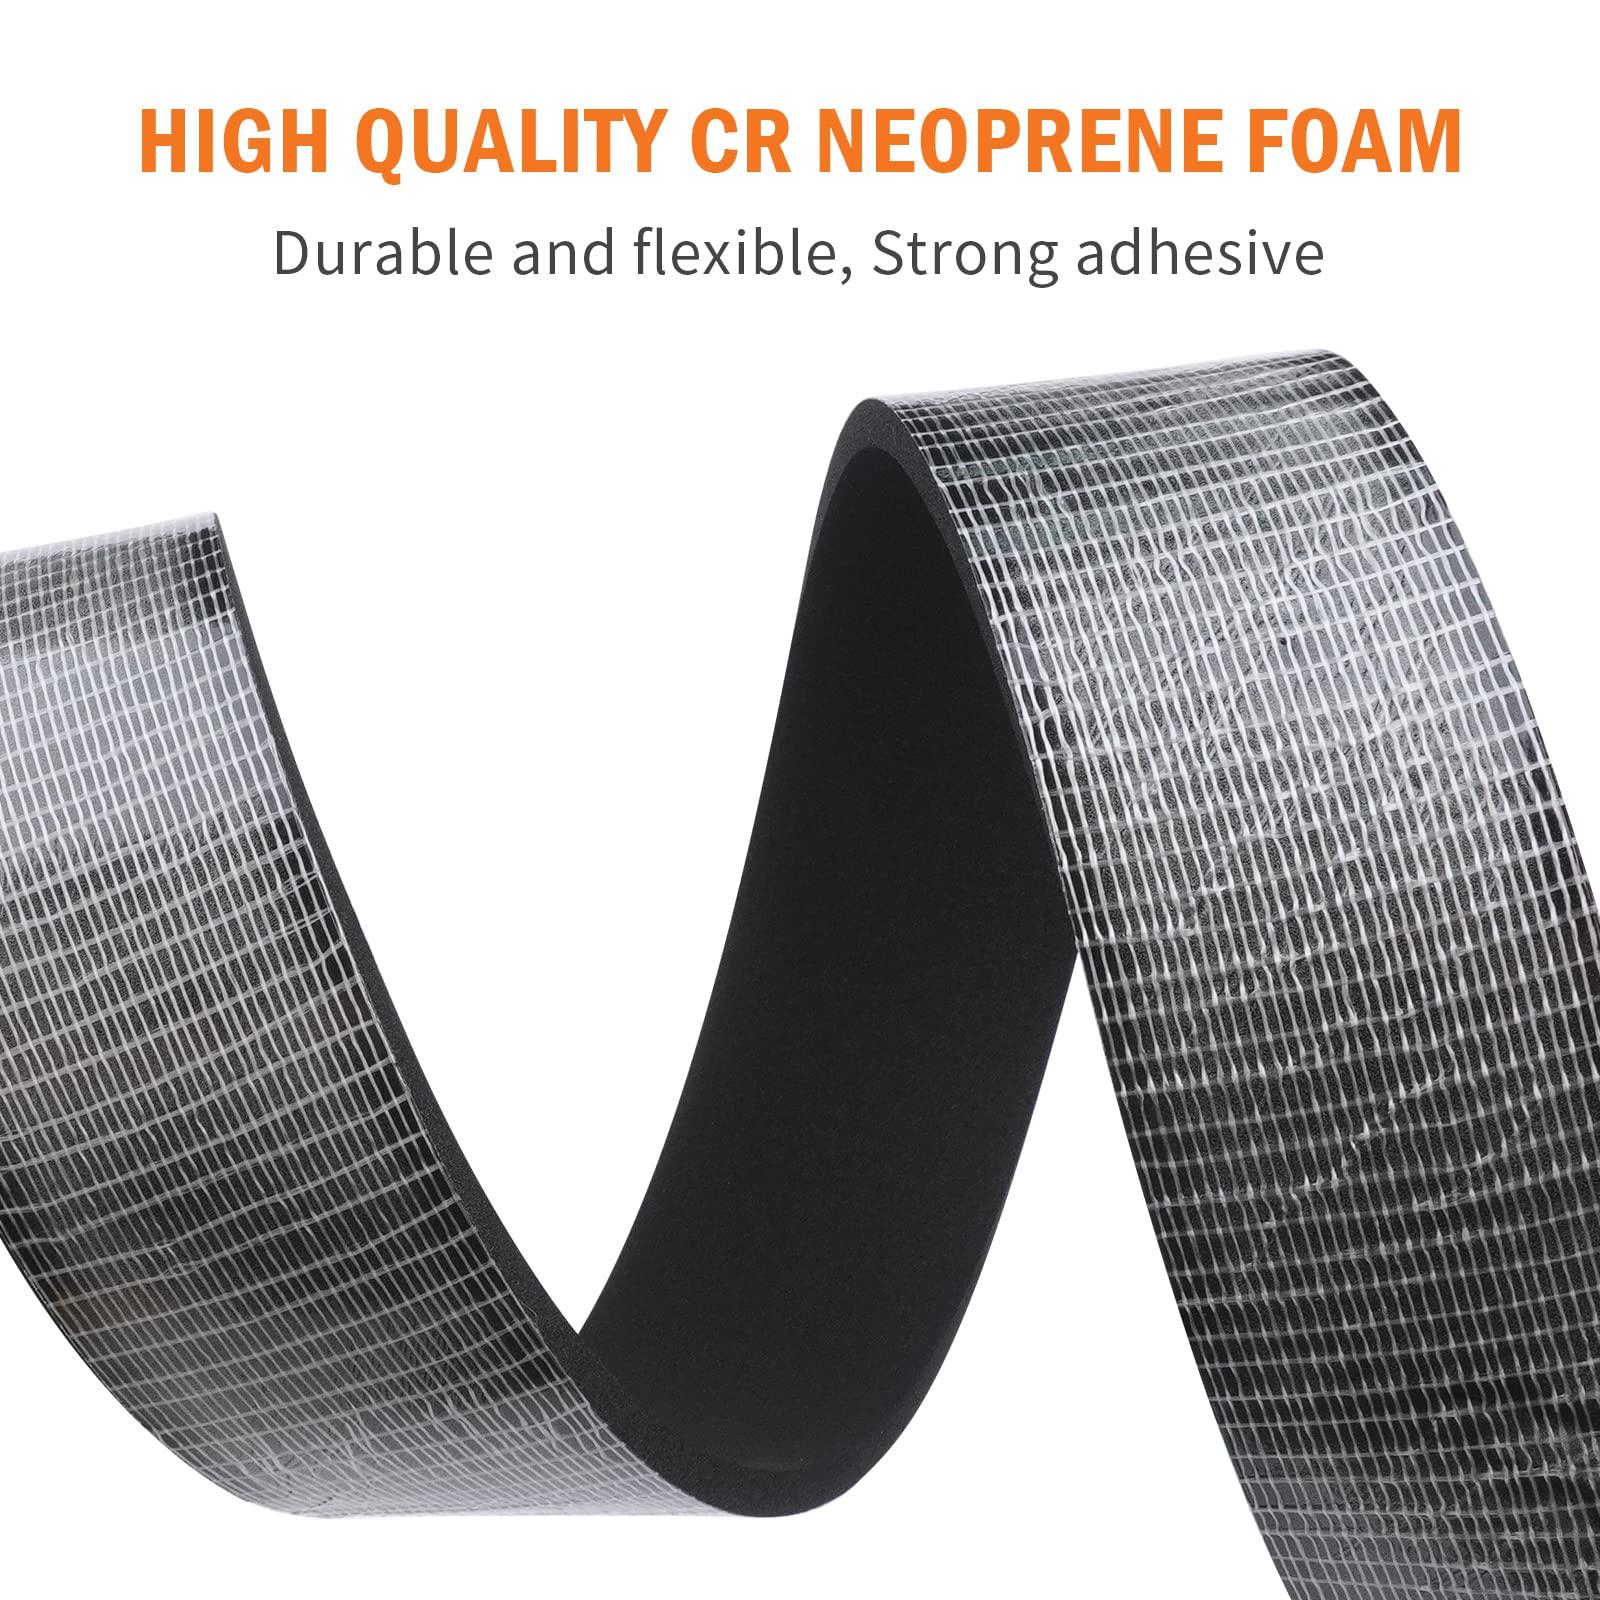 WochiTV High Density Foam Rubber Tape 50mm(W) x 6mm(T), Weatherstrip, Gasket Seal, Anti-Vibration, Anti-Collision, Shockproof, Car, Turck, Air Conditioner, Total 4m (2 Strips, 2M Long Each) 2